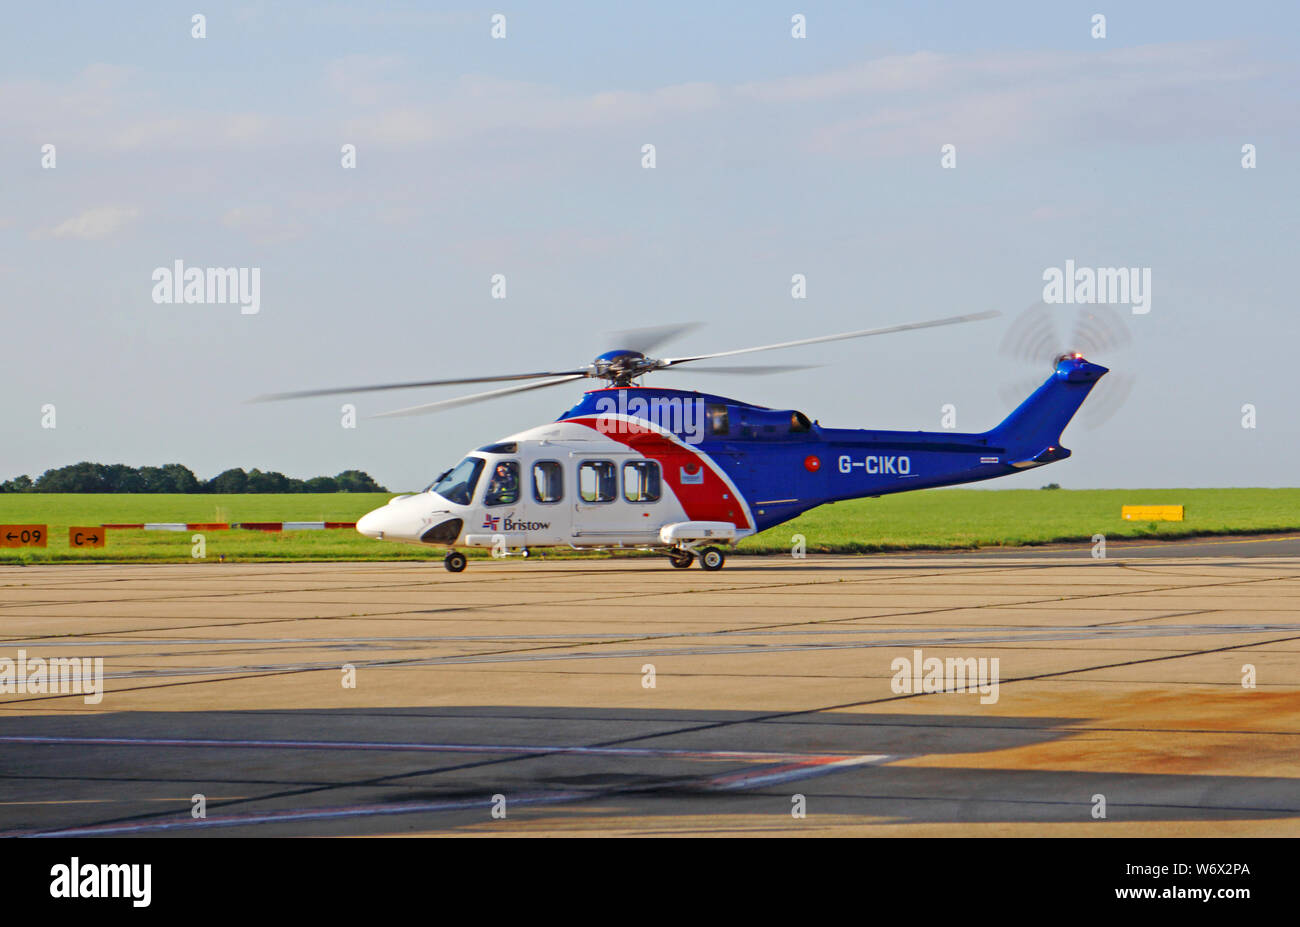 A Bristow AugustaWestland AW139 helicopter taxiing at Norwich International Airport, Norwich, Norfolk, England, United Kingdom, Europe. Stock Photo